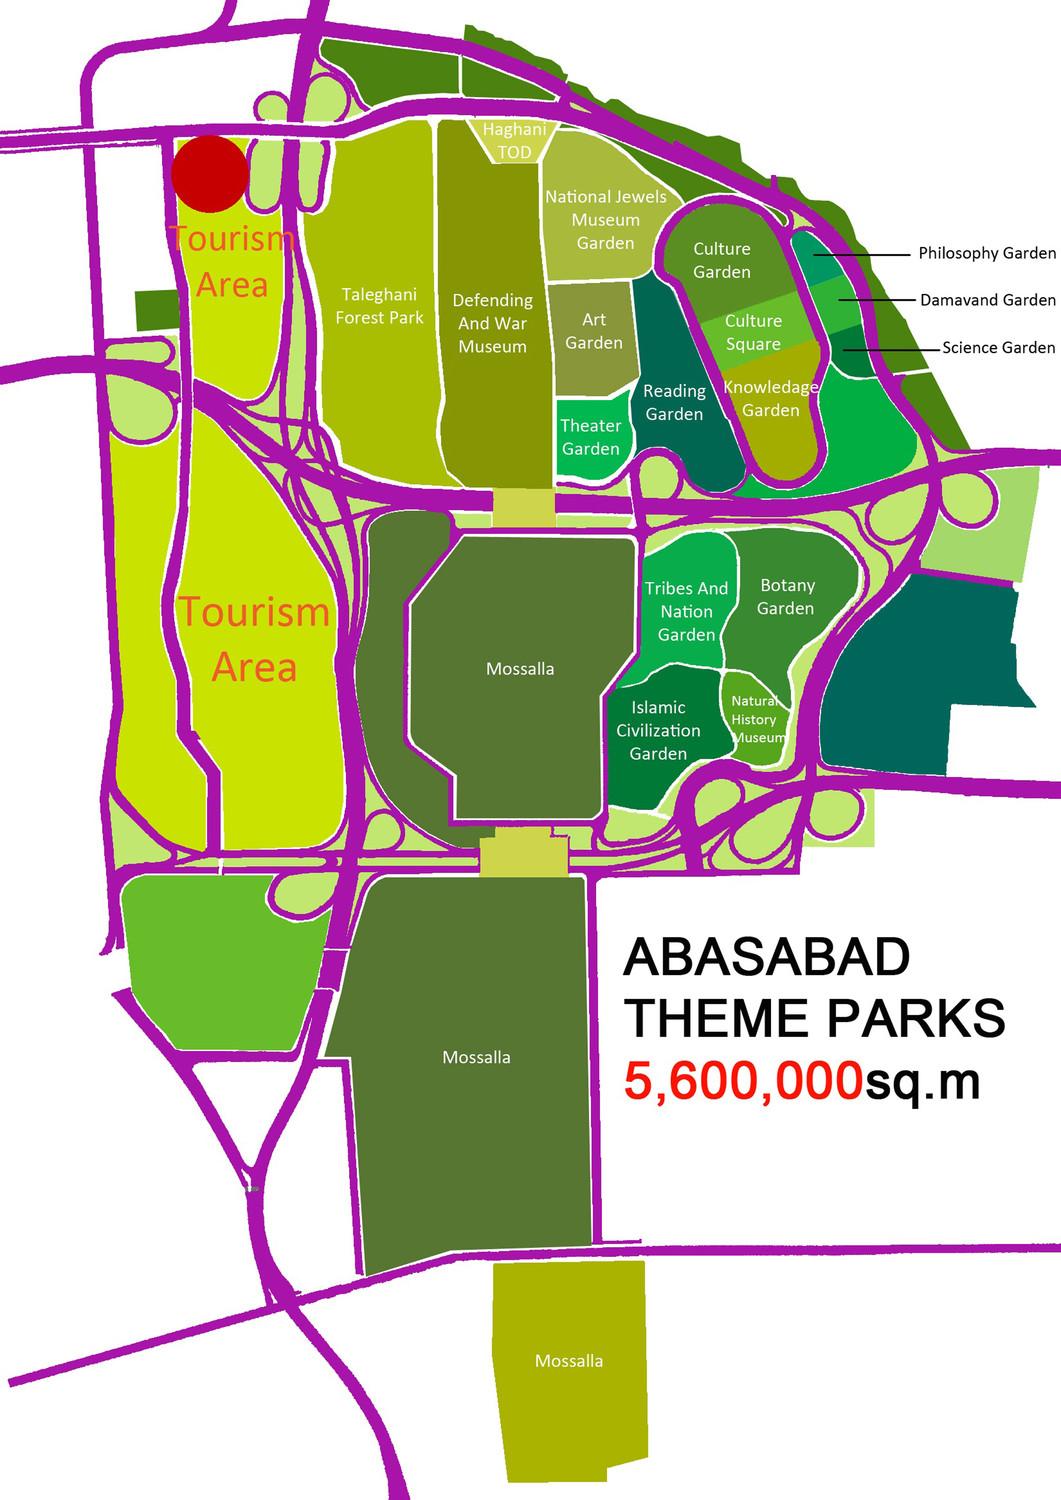 Abbasabad thematic parks and location of Abo - Atash